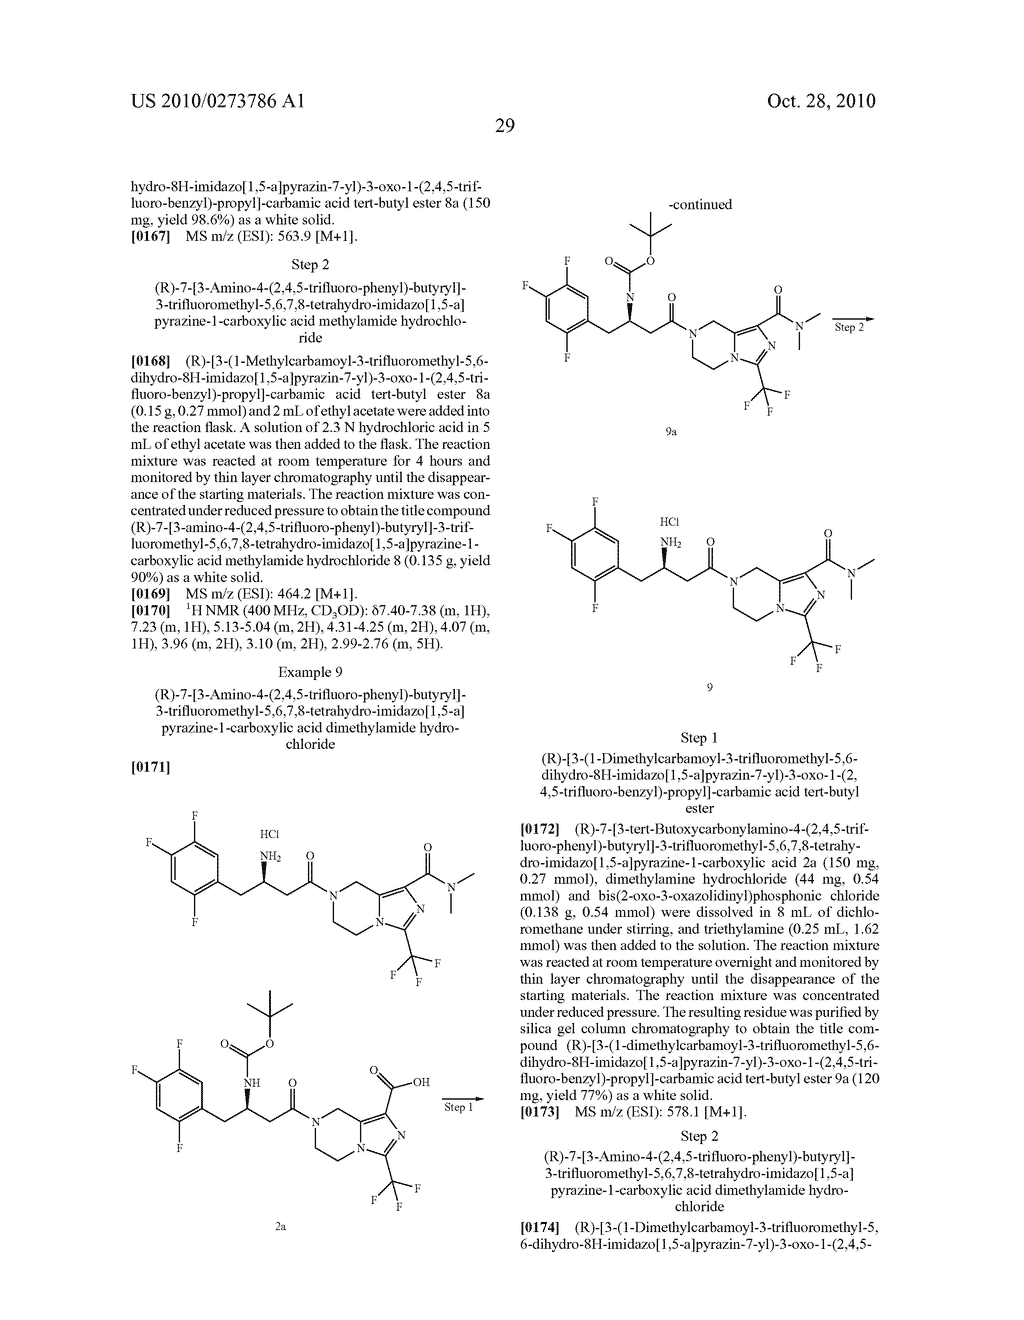 TETRAHYDRO-IMIDAZ0[1,5-A]PYRAZINE DERIVATIVES, PREPARATION PROCESS AND MEDICINAL USE THEREOF - diagram, schematic, and image 30